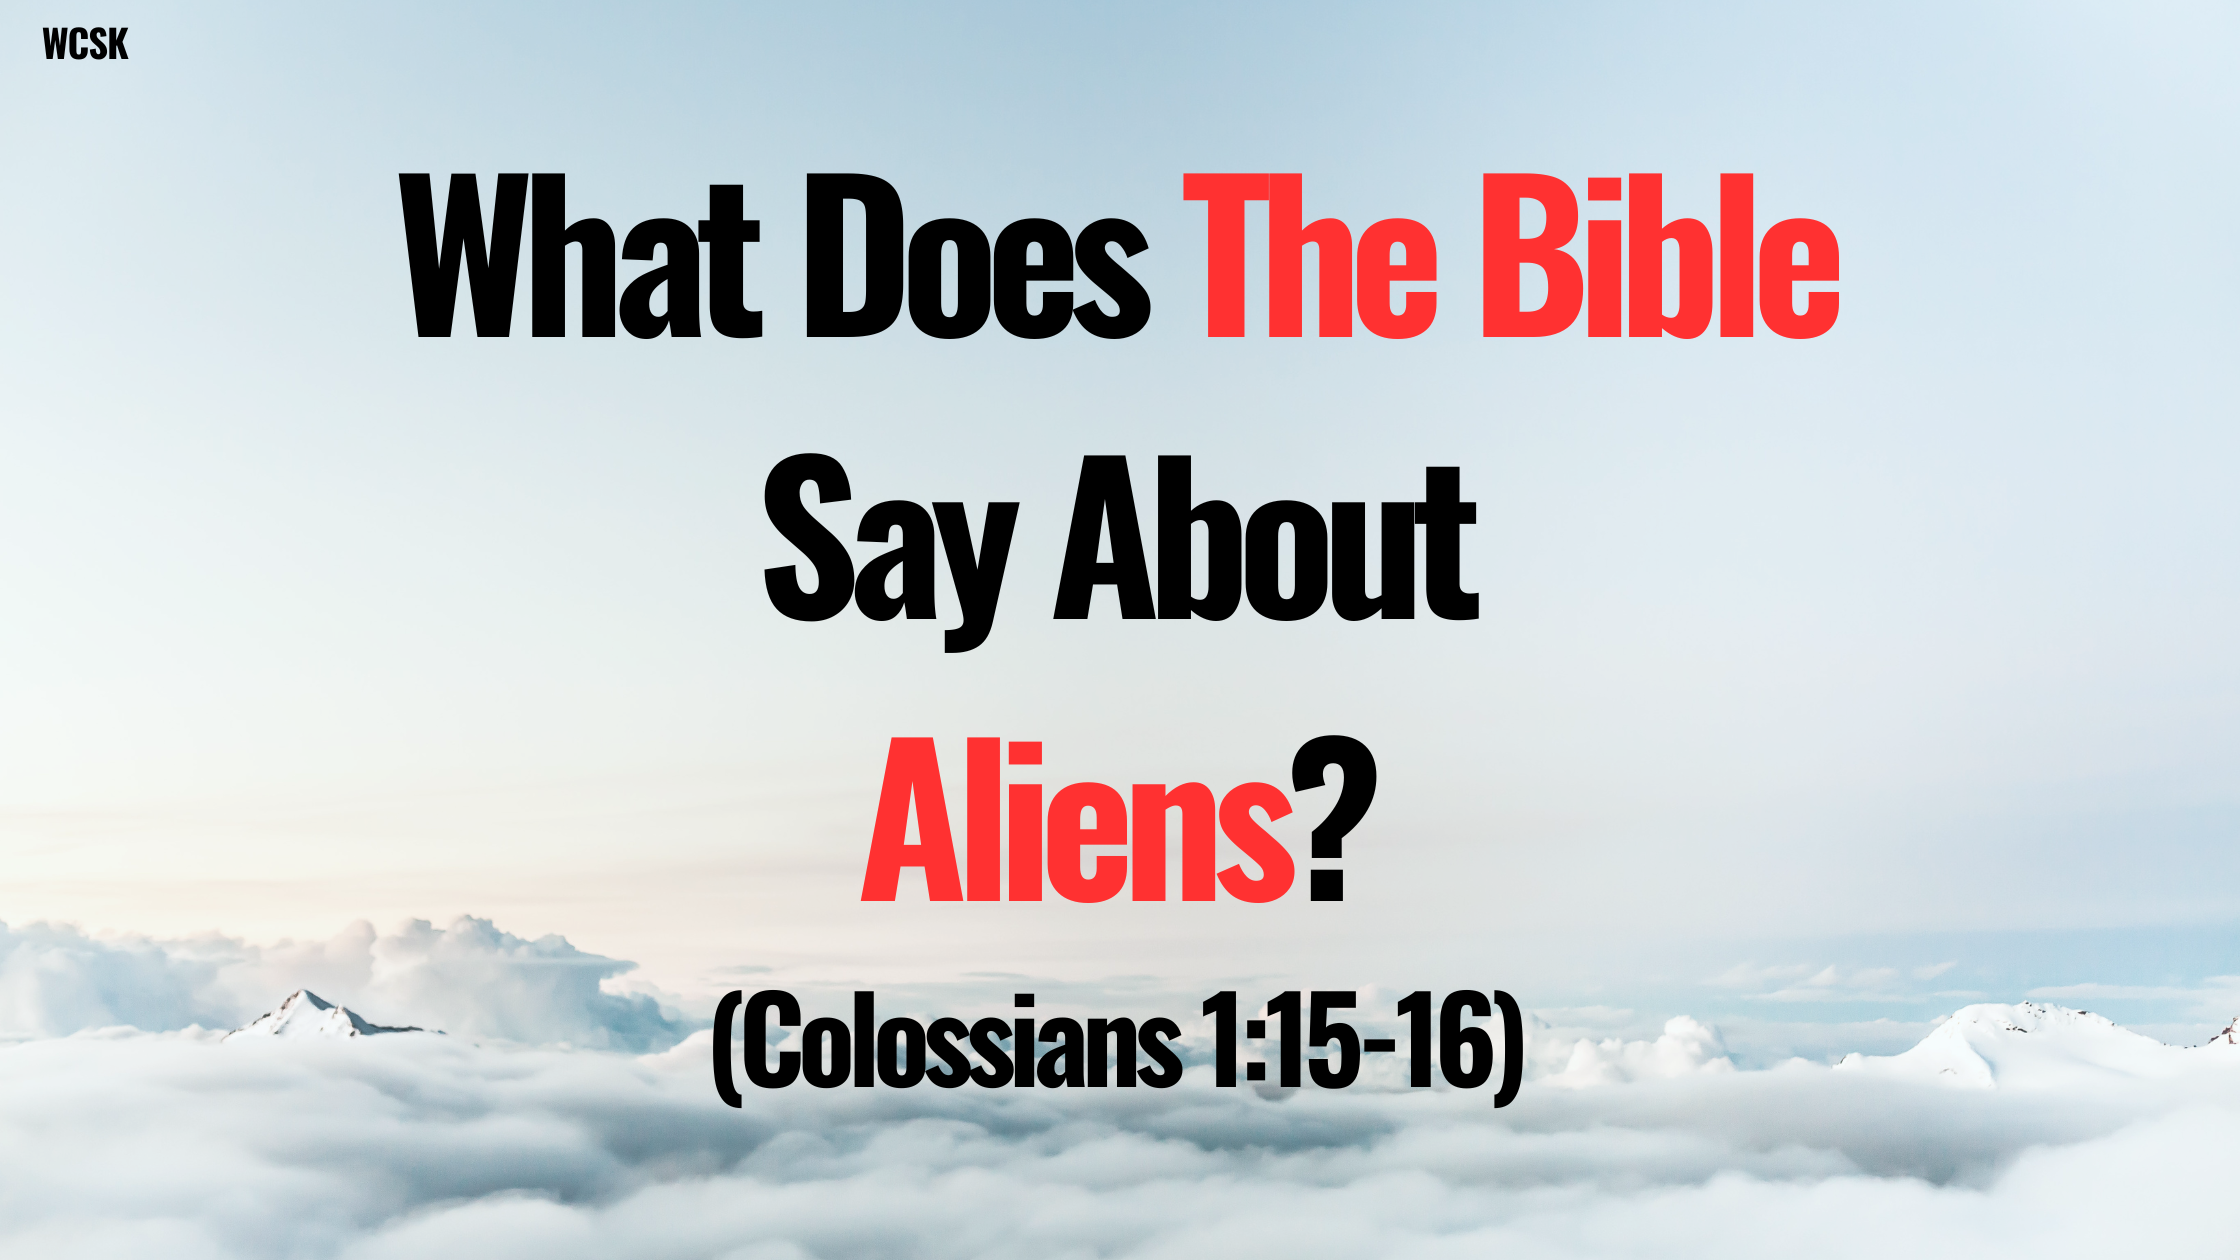 What Does The Bible Say About Aliens?